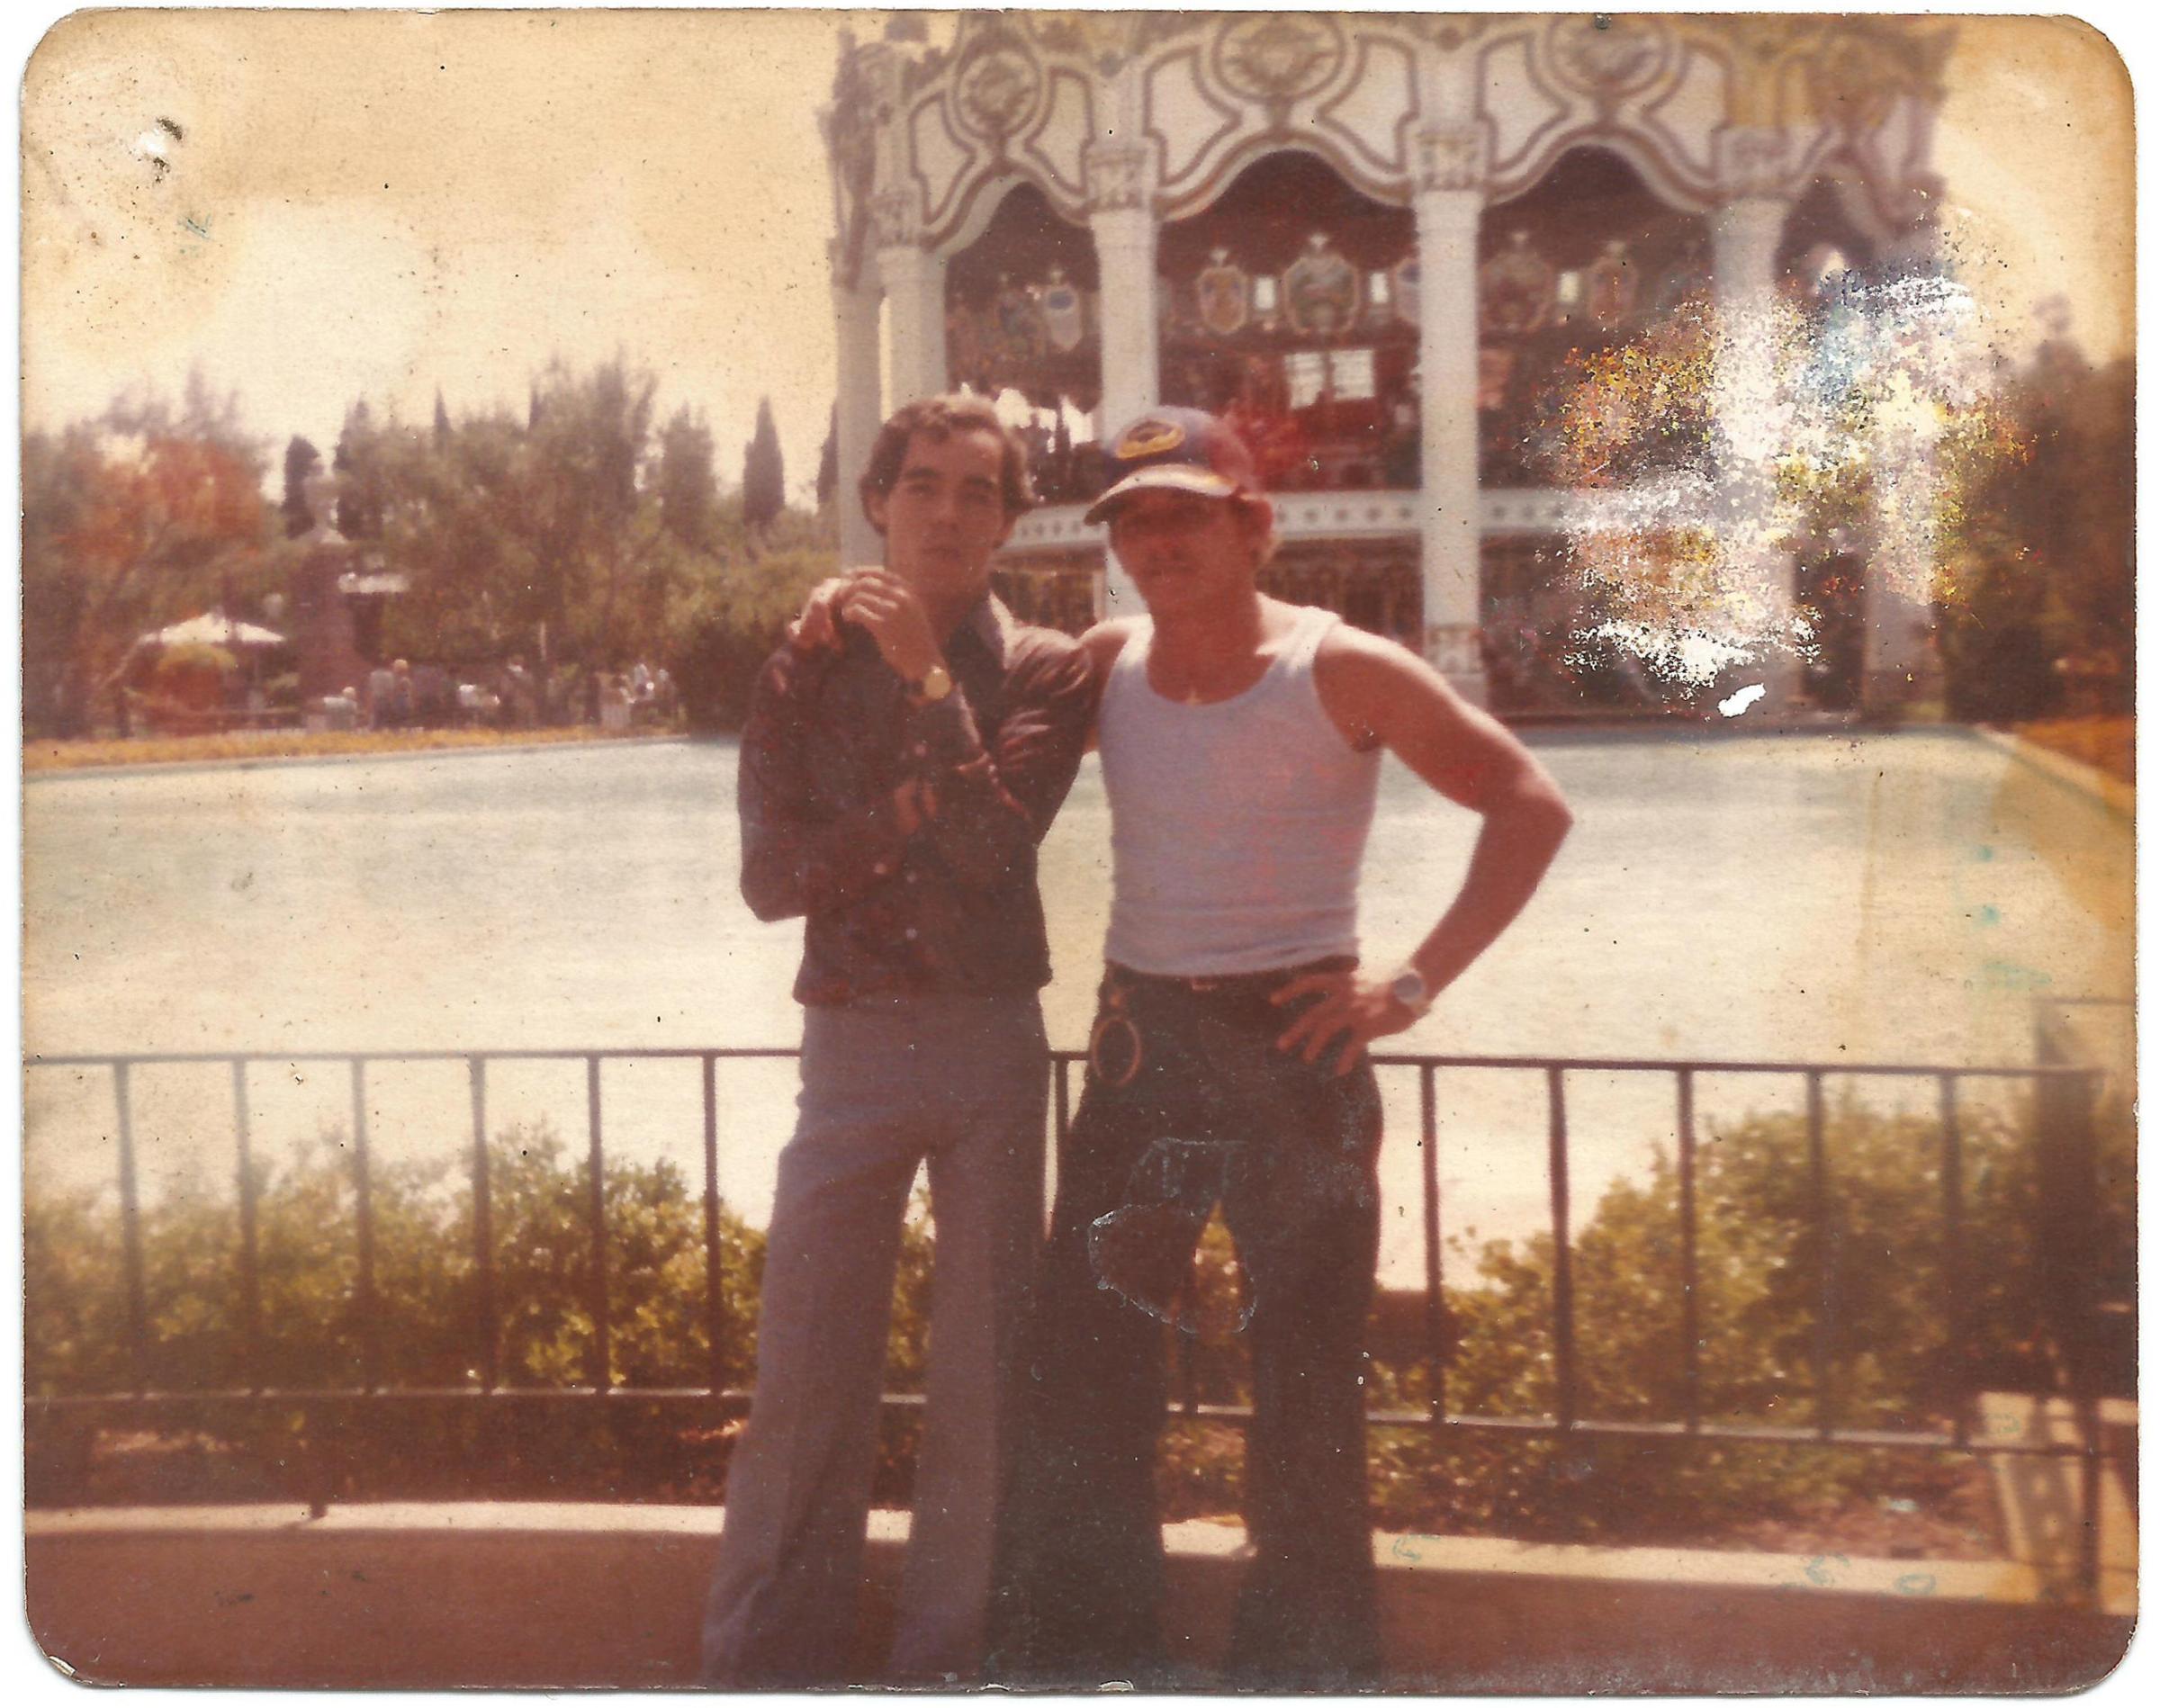 Brothers Jorge (left) and Juanito (right) in California. Juanito constantly sent photos and letters to Cuba for his wife and children. This photo came with a dedication on the back that read: "To Mileidys and Juan Alberto from your daddy, I love you very much. June 9, 1980"